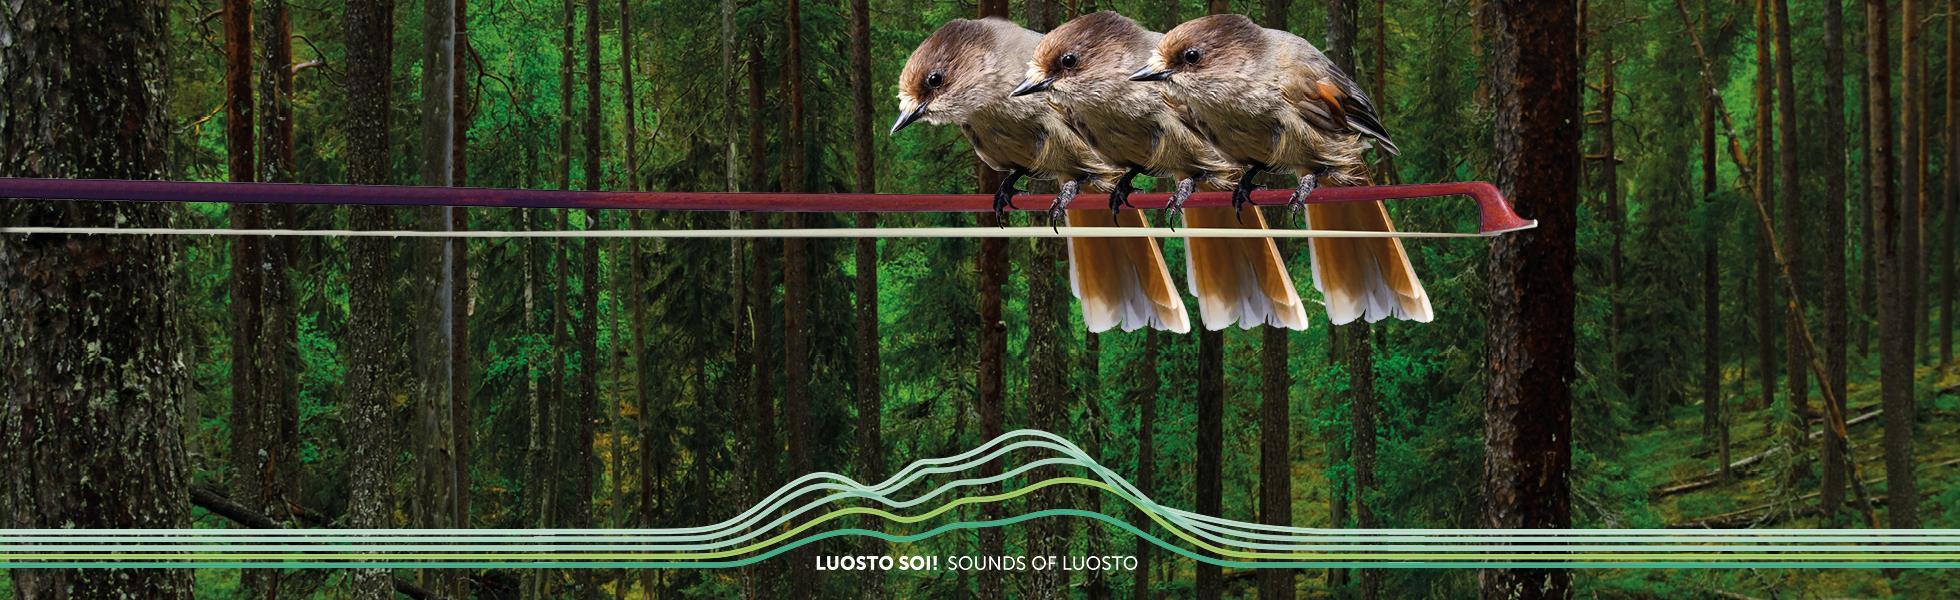 Sounds of Luosto 2021 festival tickets on sale now!